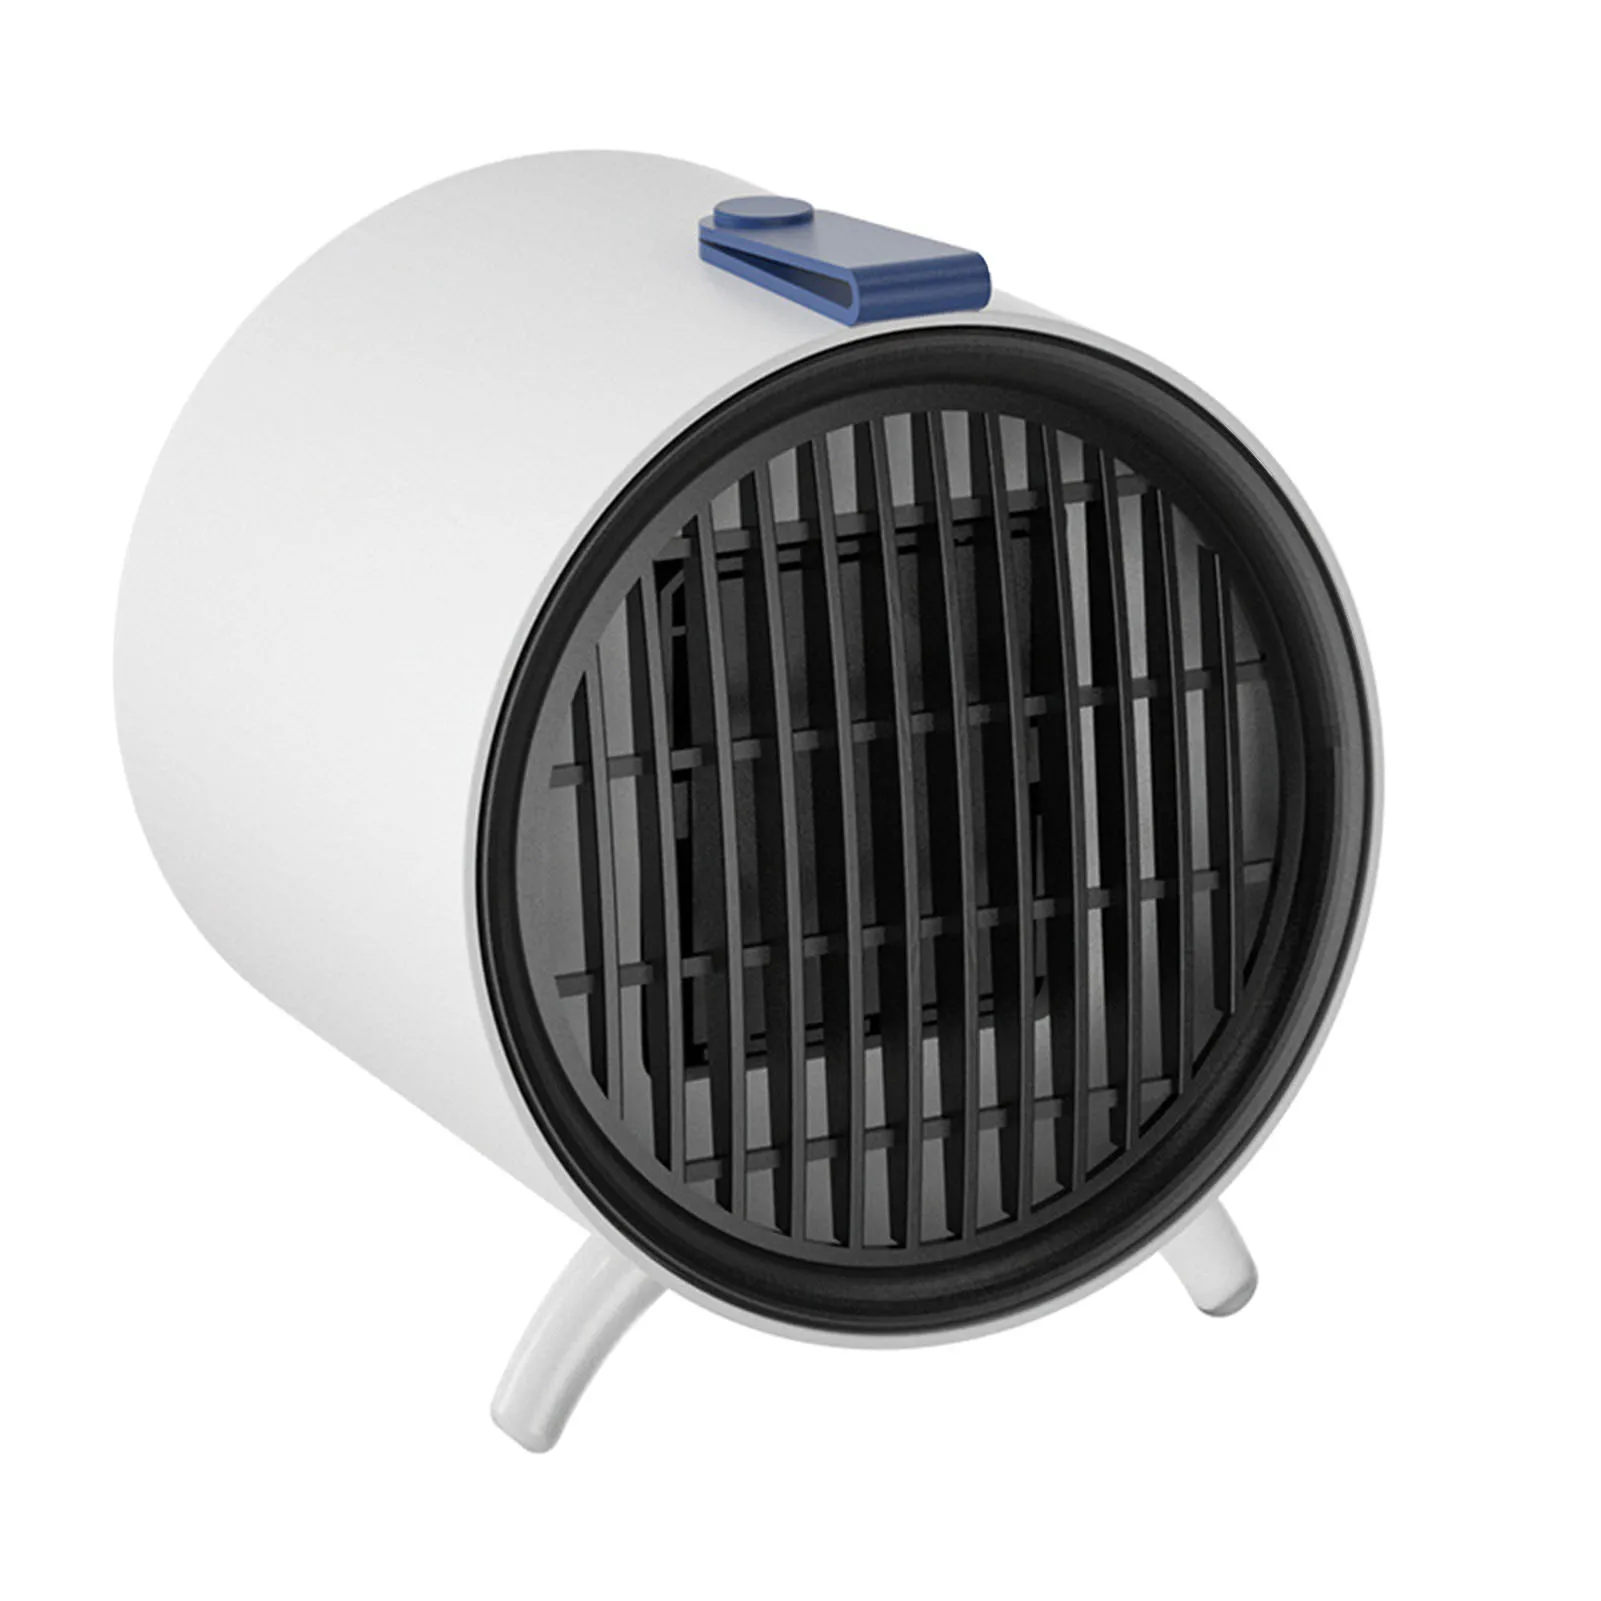 

Fan Heater Space Heater For Indoor Use Portable Electric Space Heater 500W Ceramic Heater Safe And Quiet For Office Bedroom Desk